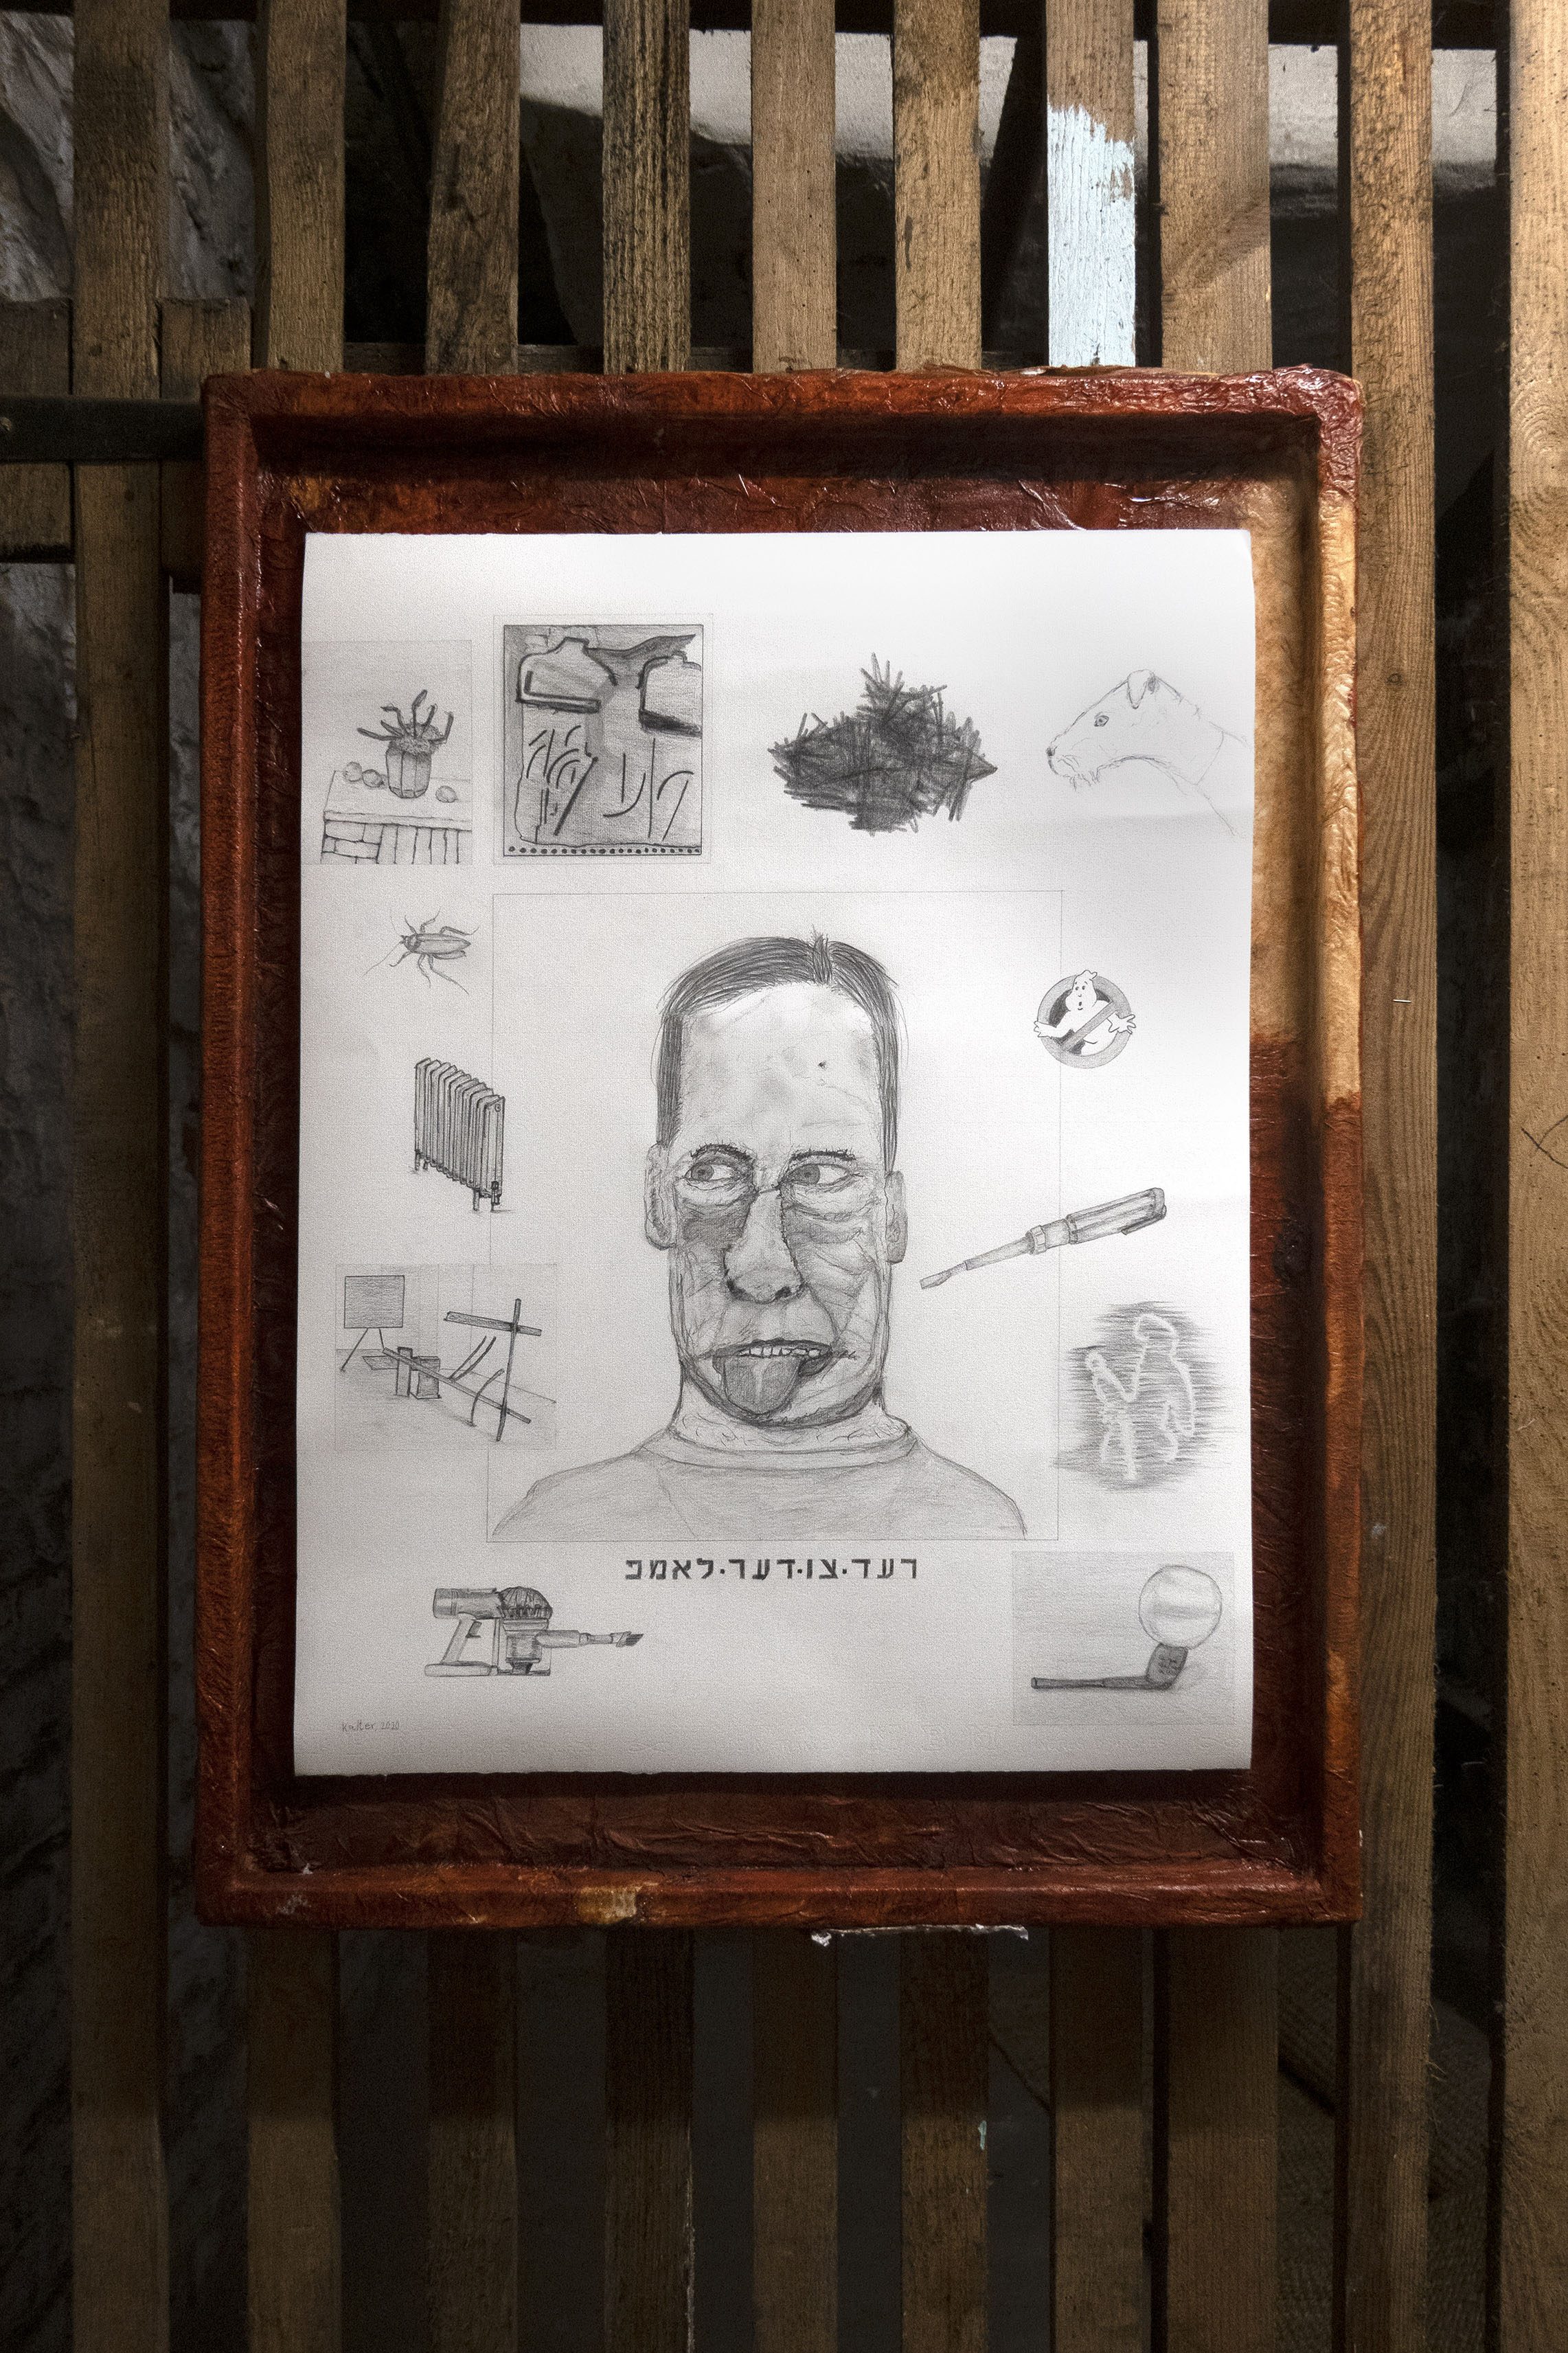 I. S. Kalter, "Talk to The Lamp", 2020â€“22. Pencil and graphite on paper, artist frame, 65x50 cm (with frame, 80x60x4 cm)